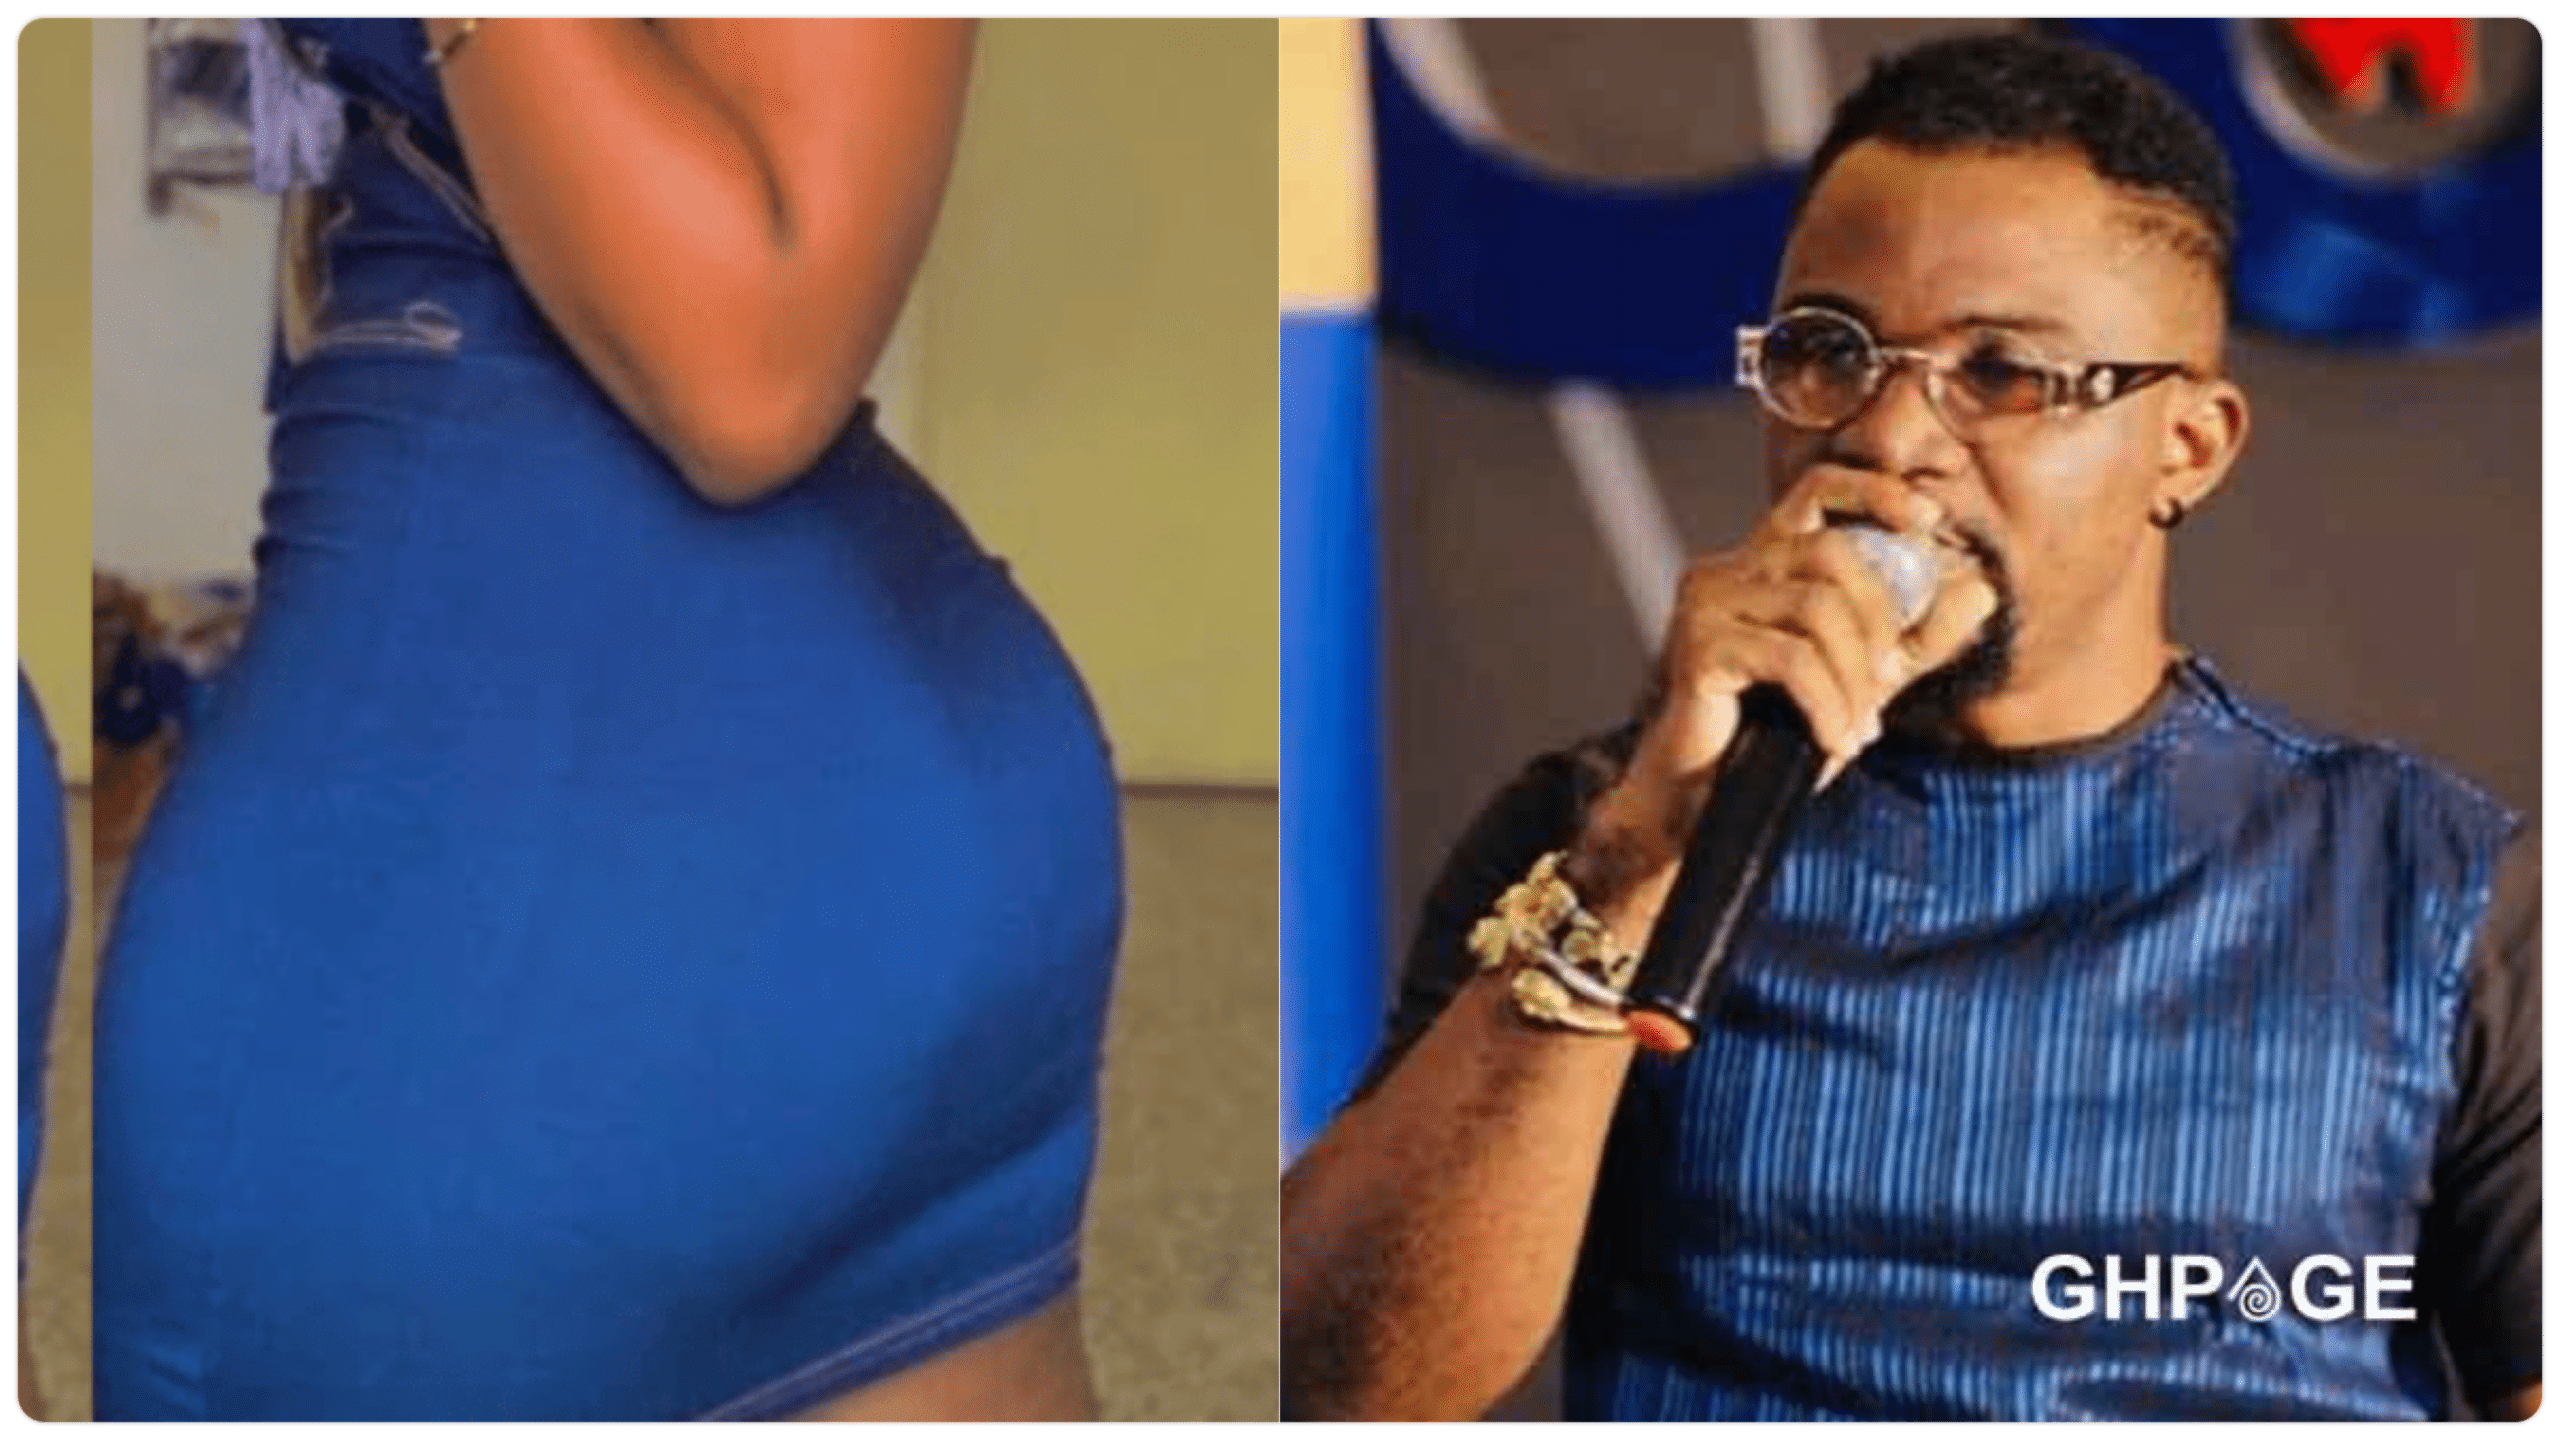 "Don't marry non-virgins, they carry curse - Mr Logic cautions men